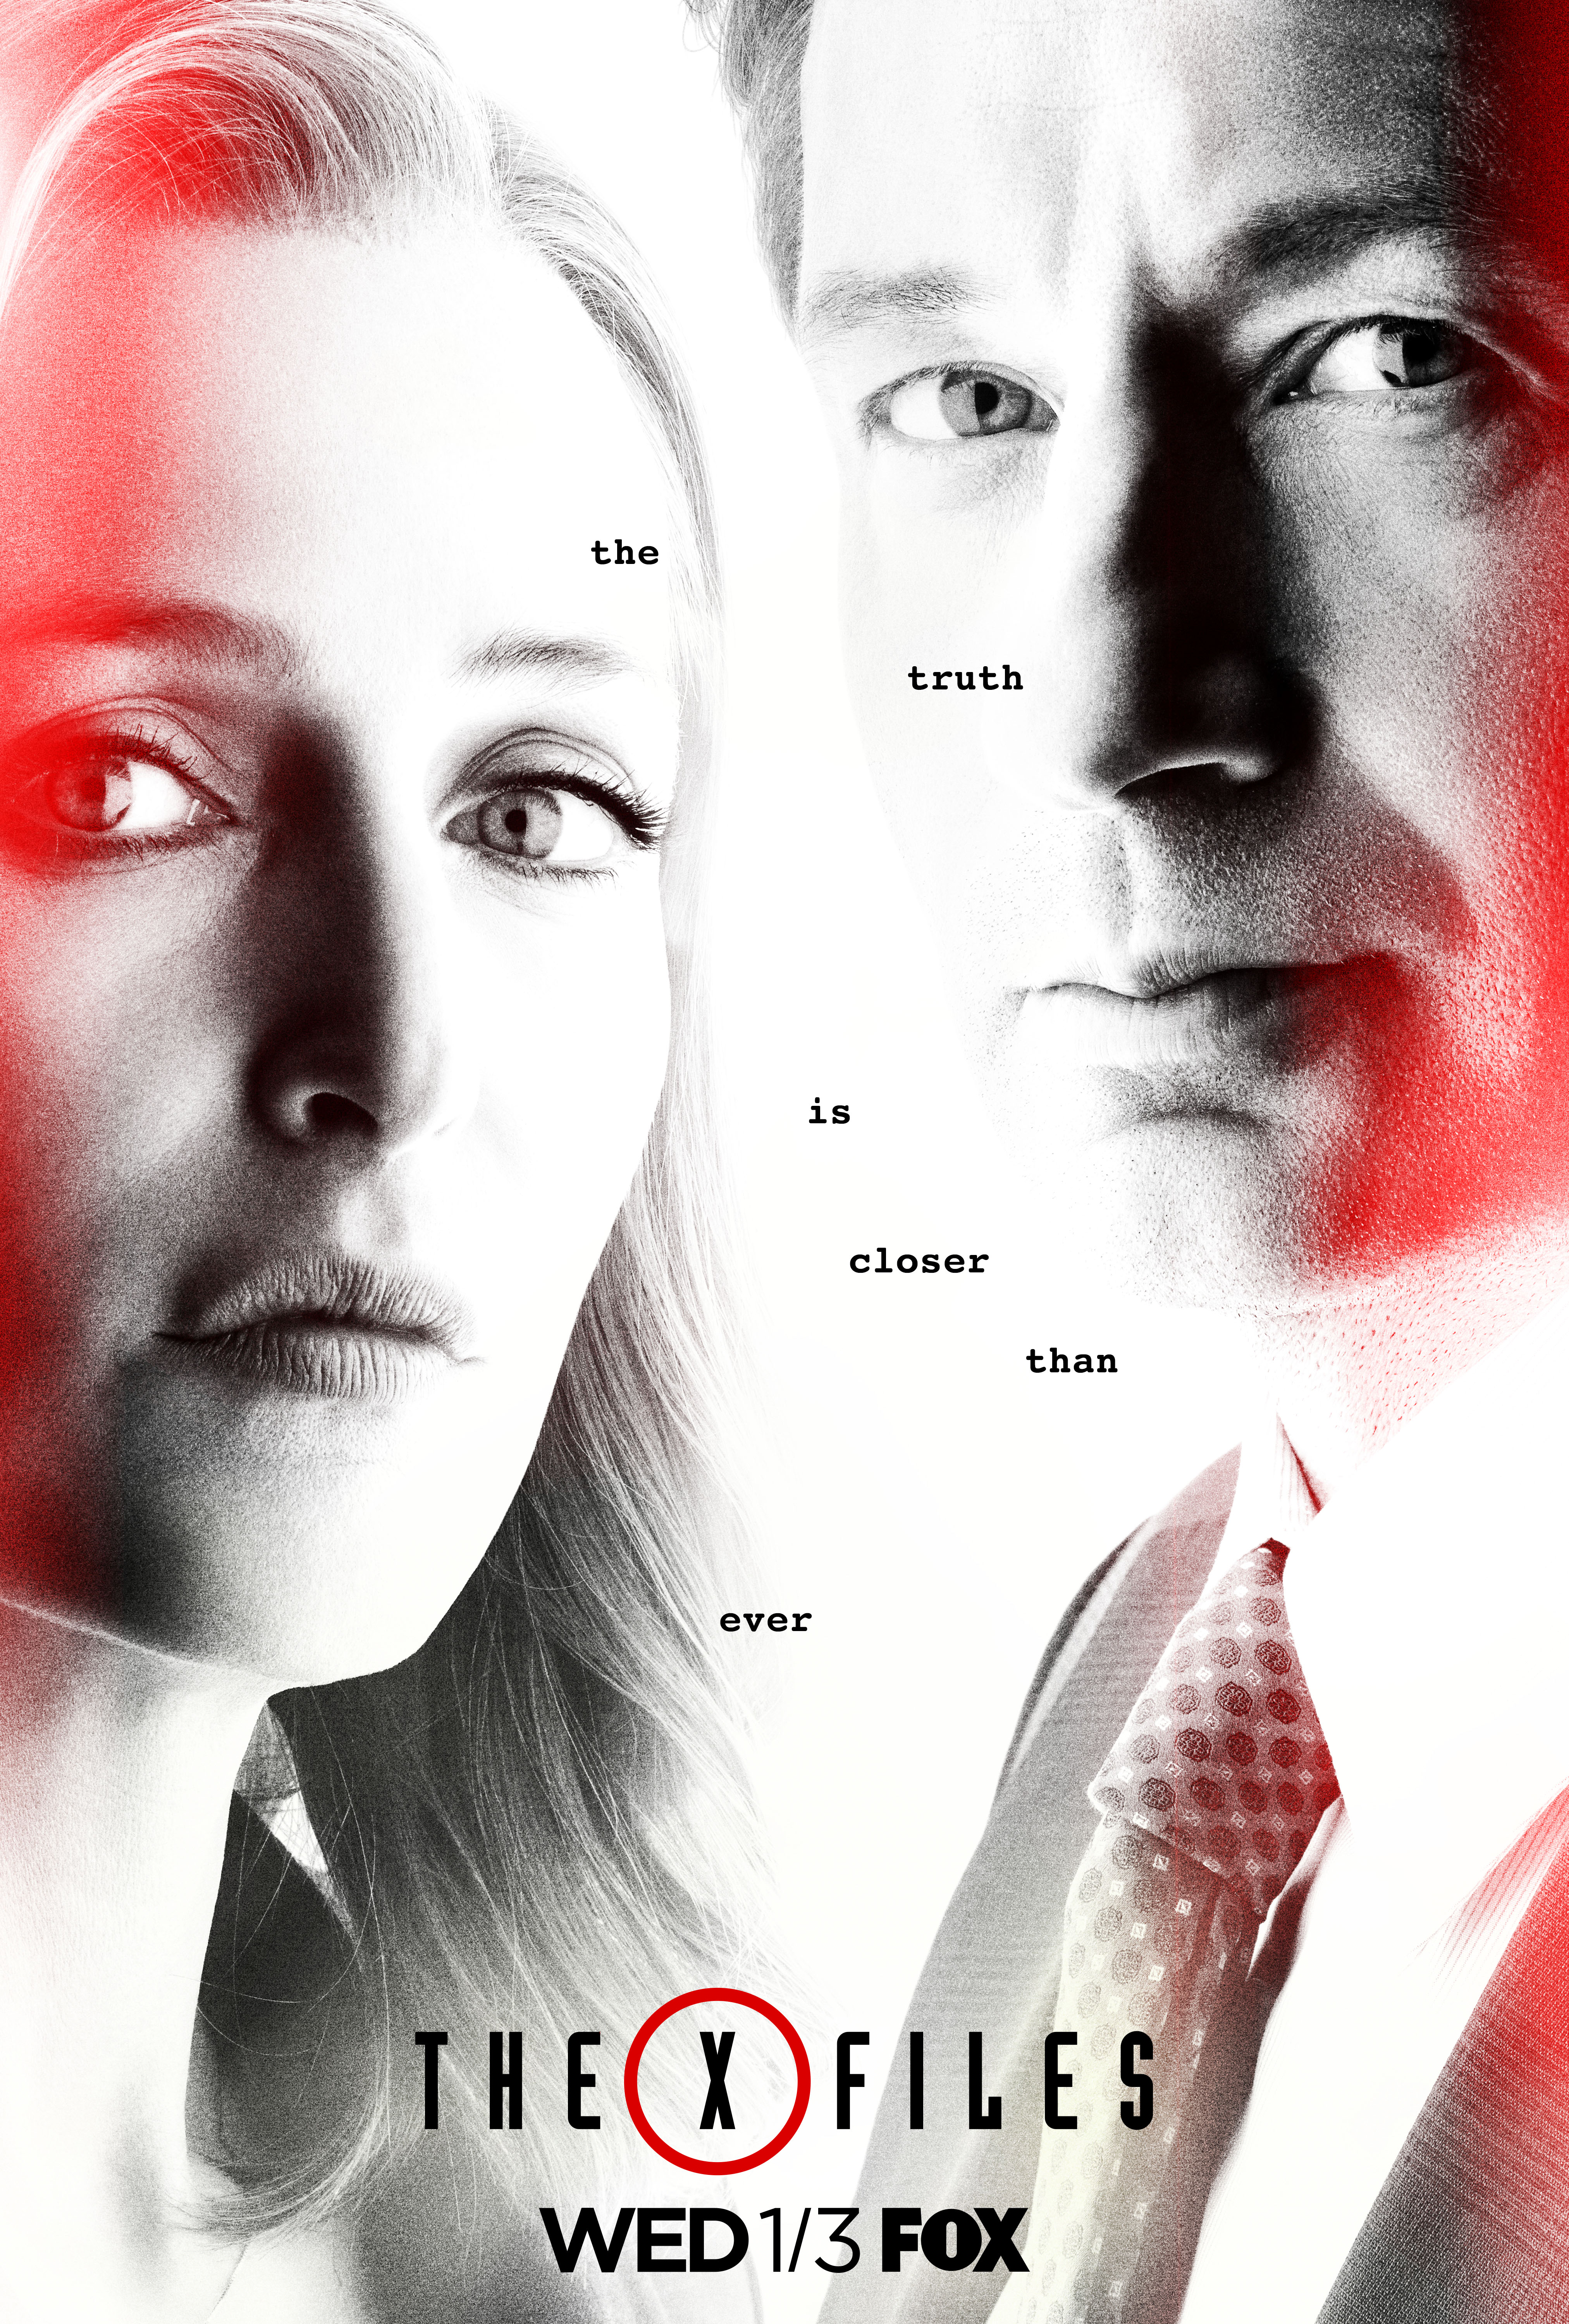 x files characters